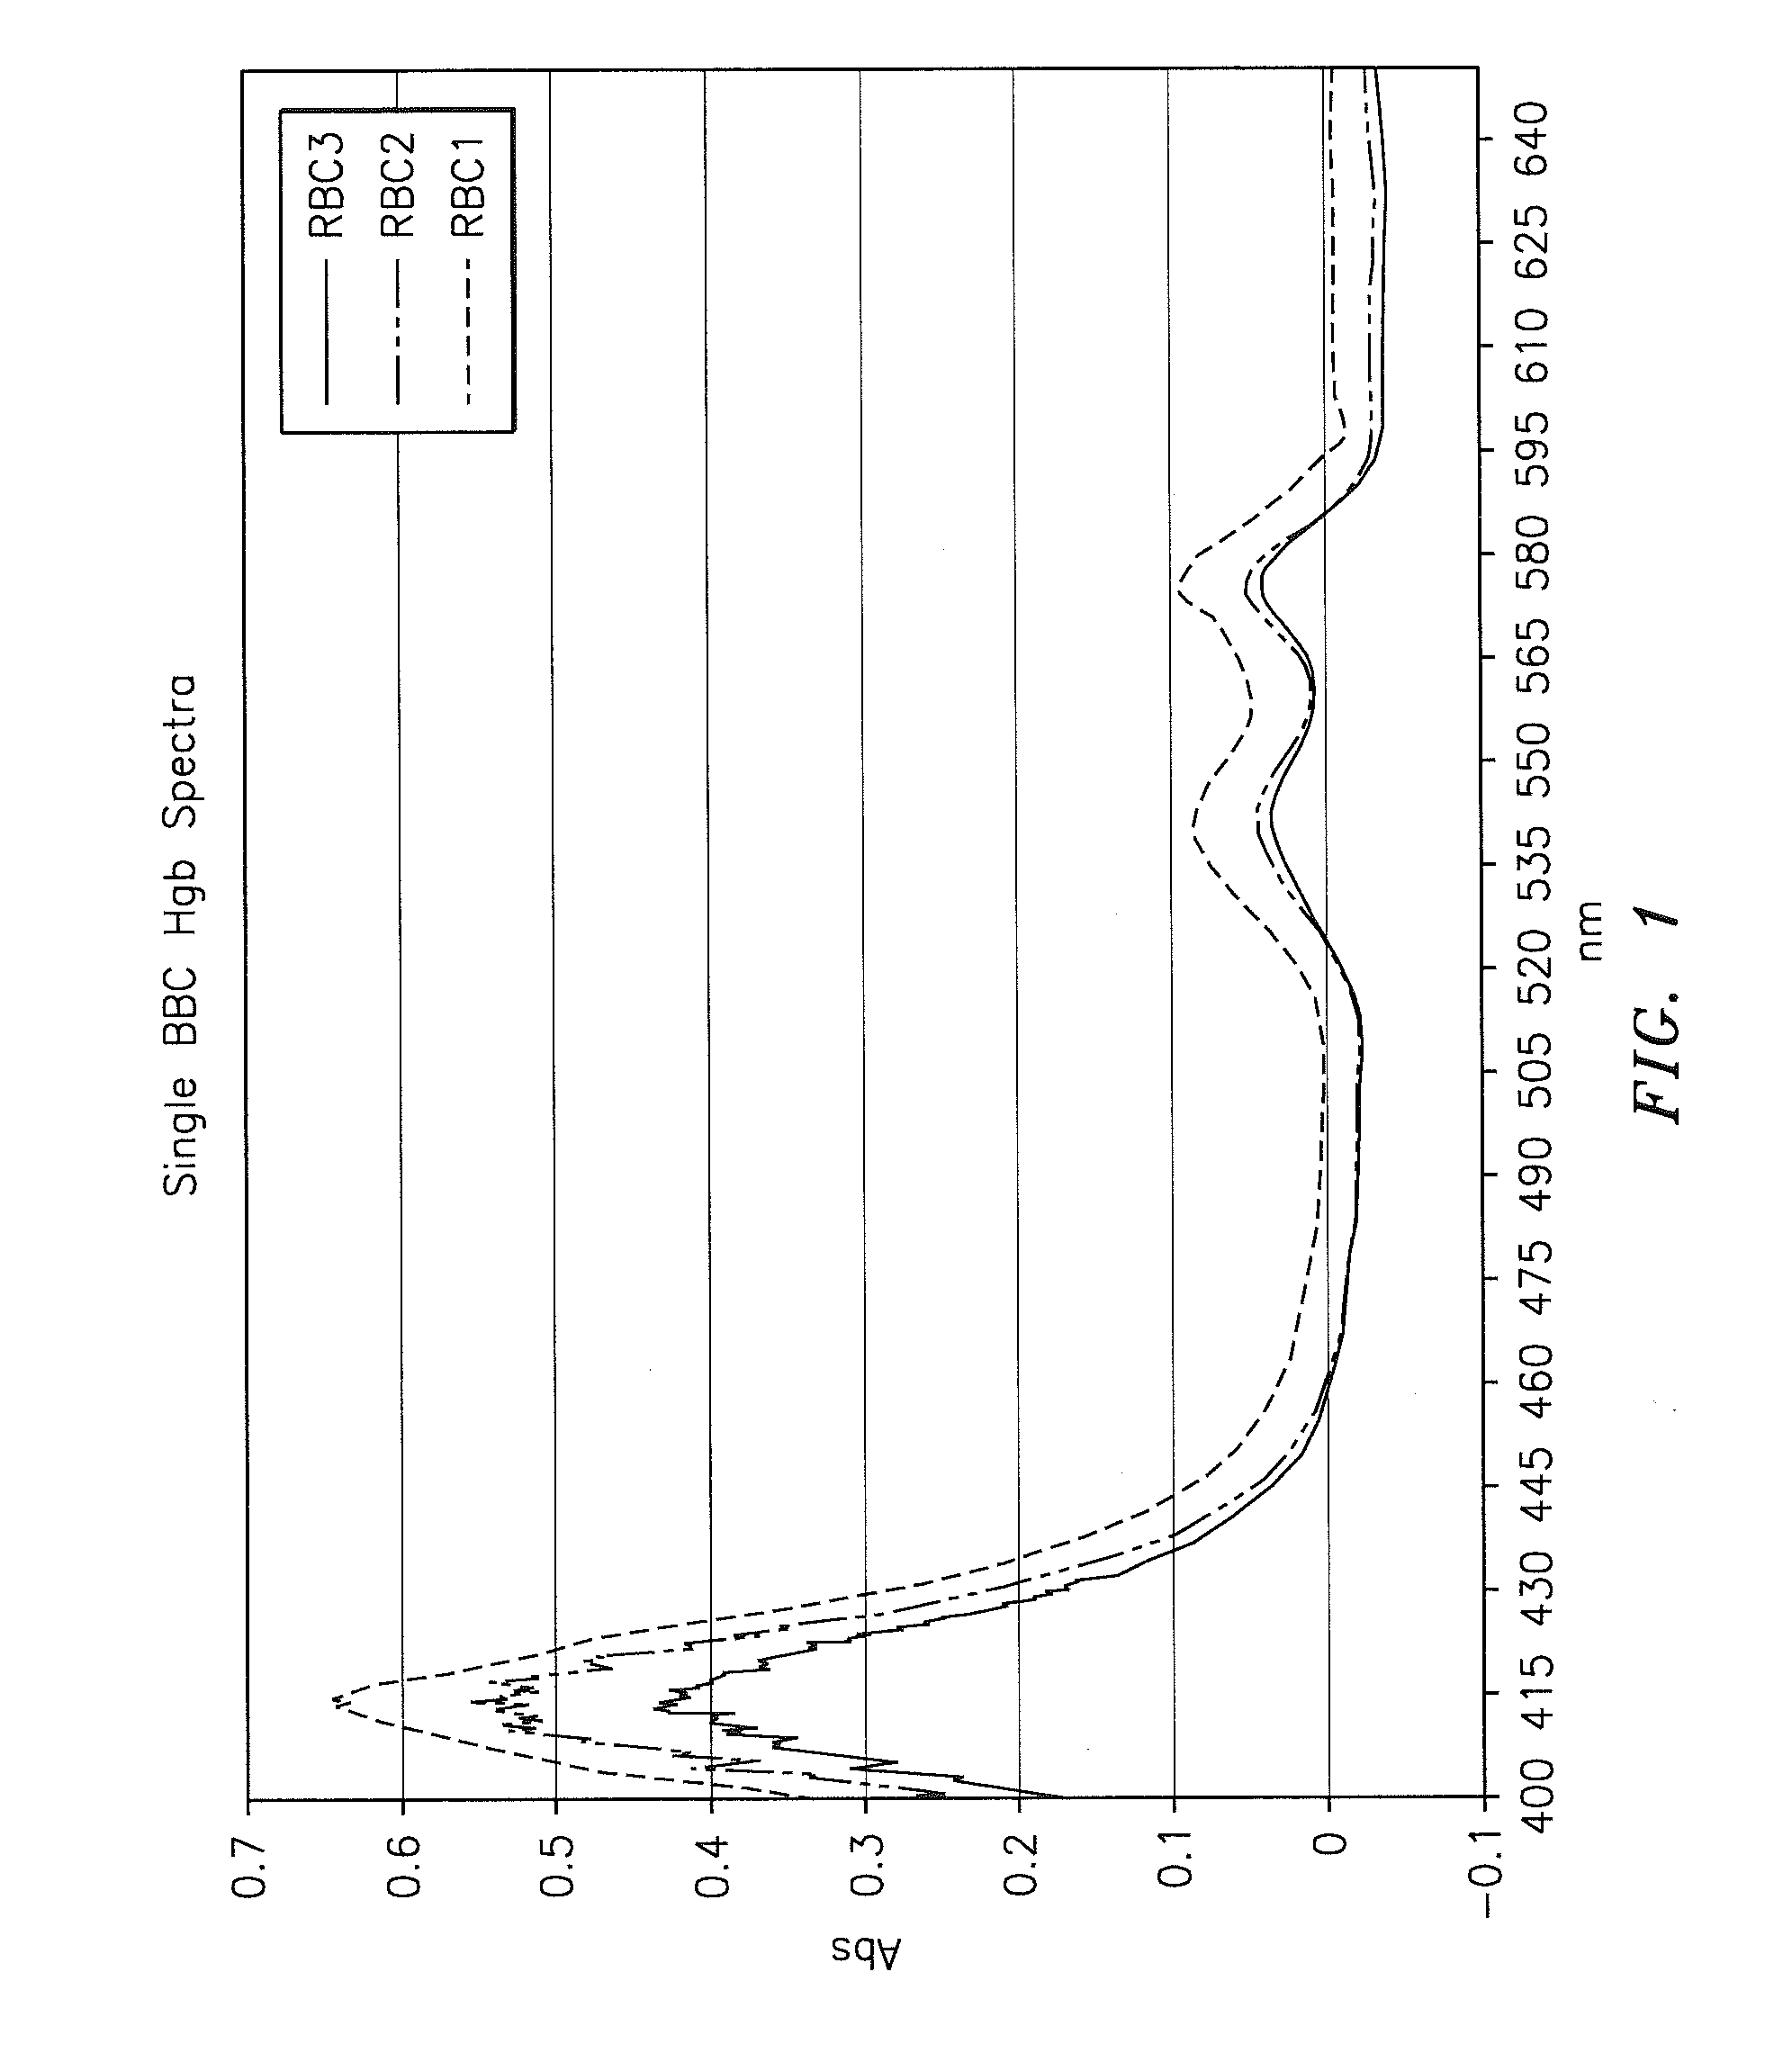 Method and apparatus for determining at least one hemoglobin related parameter of a whole blood sample